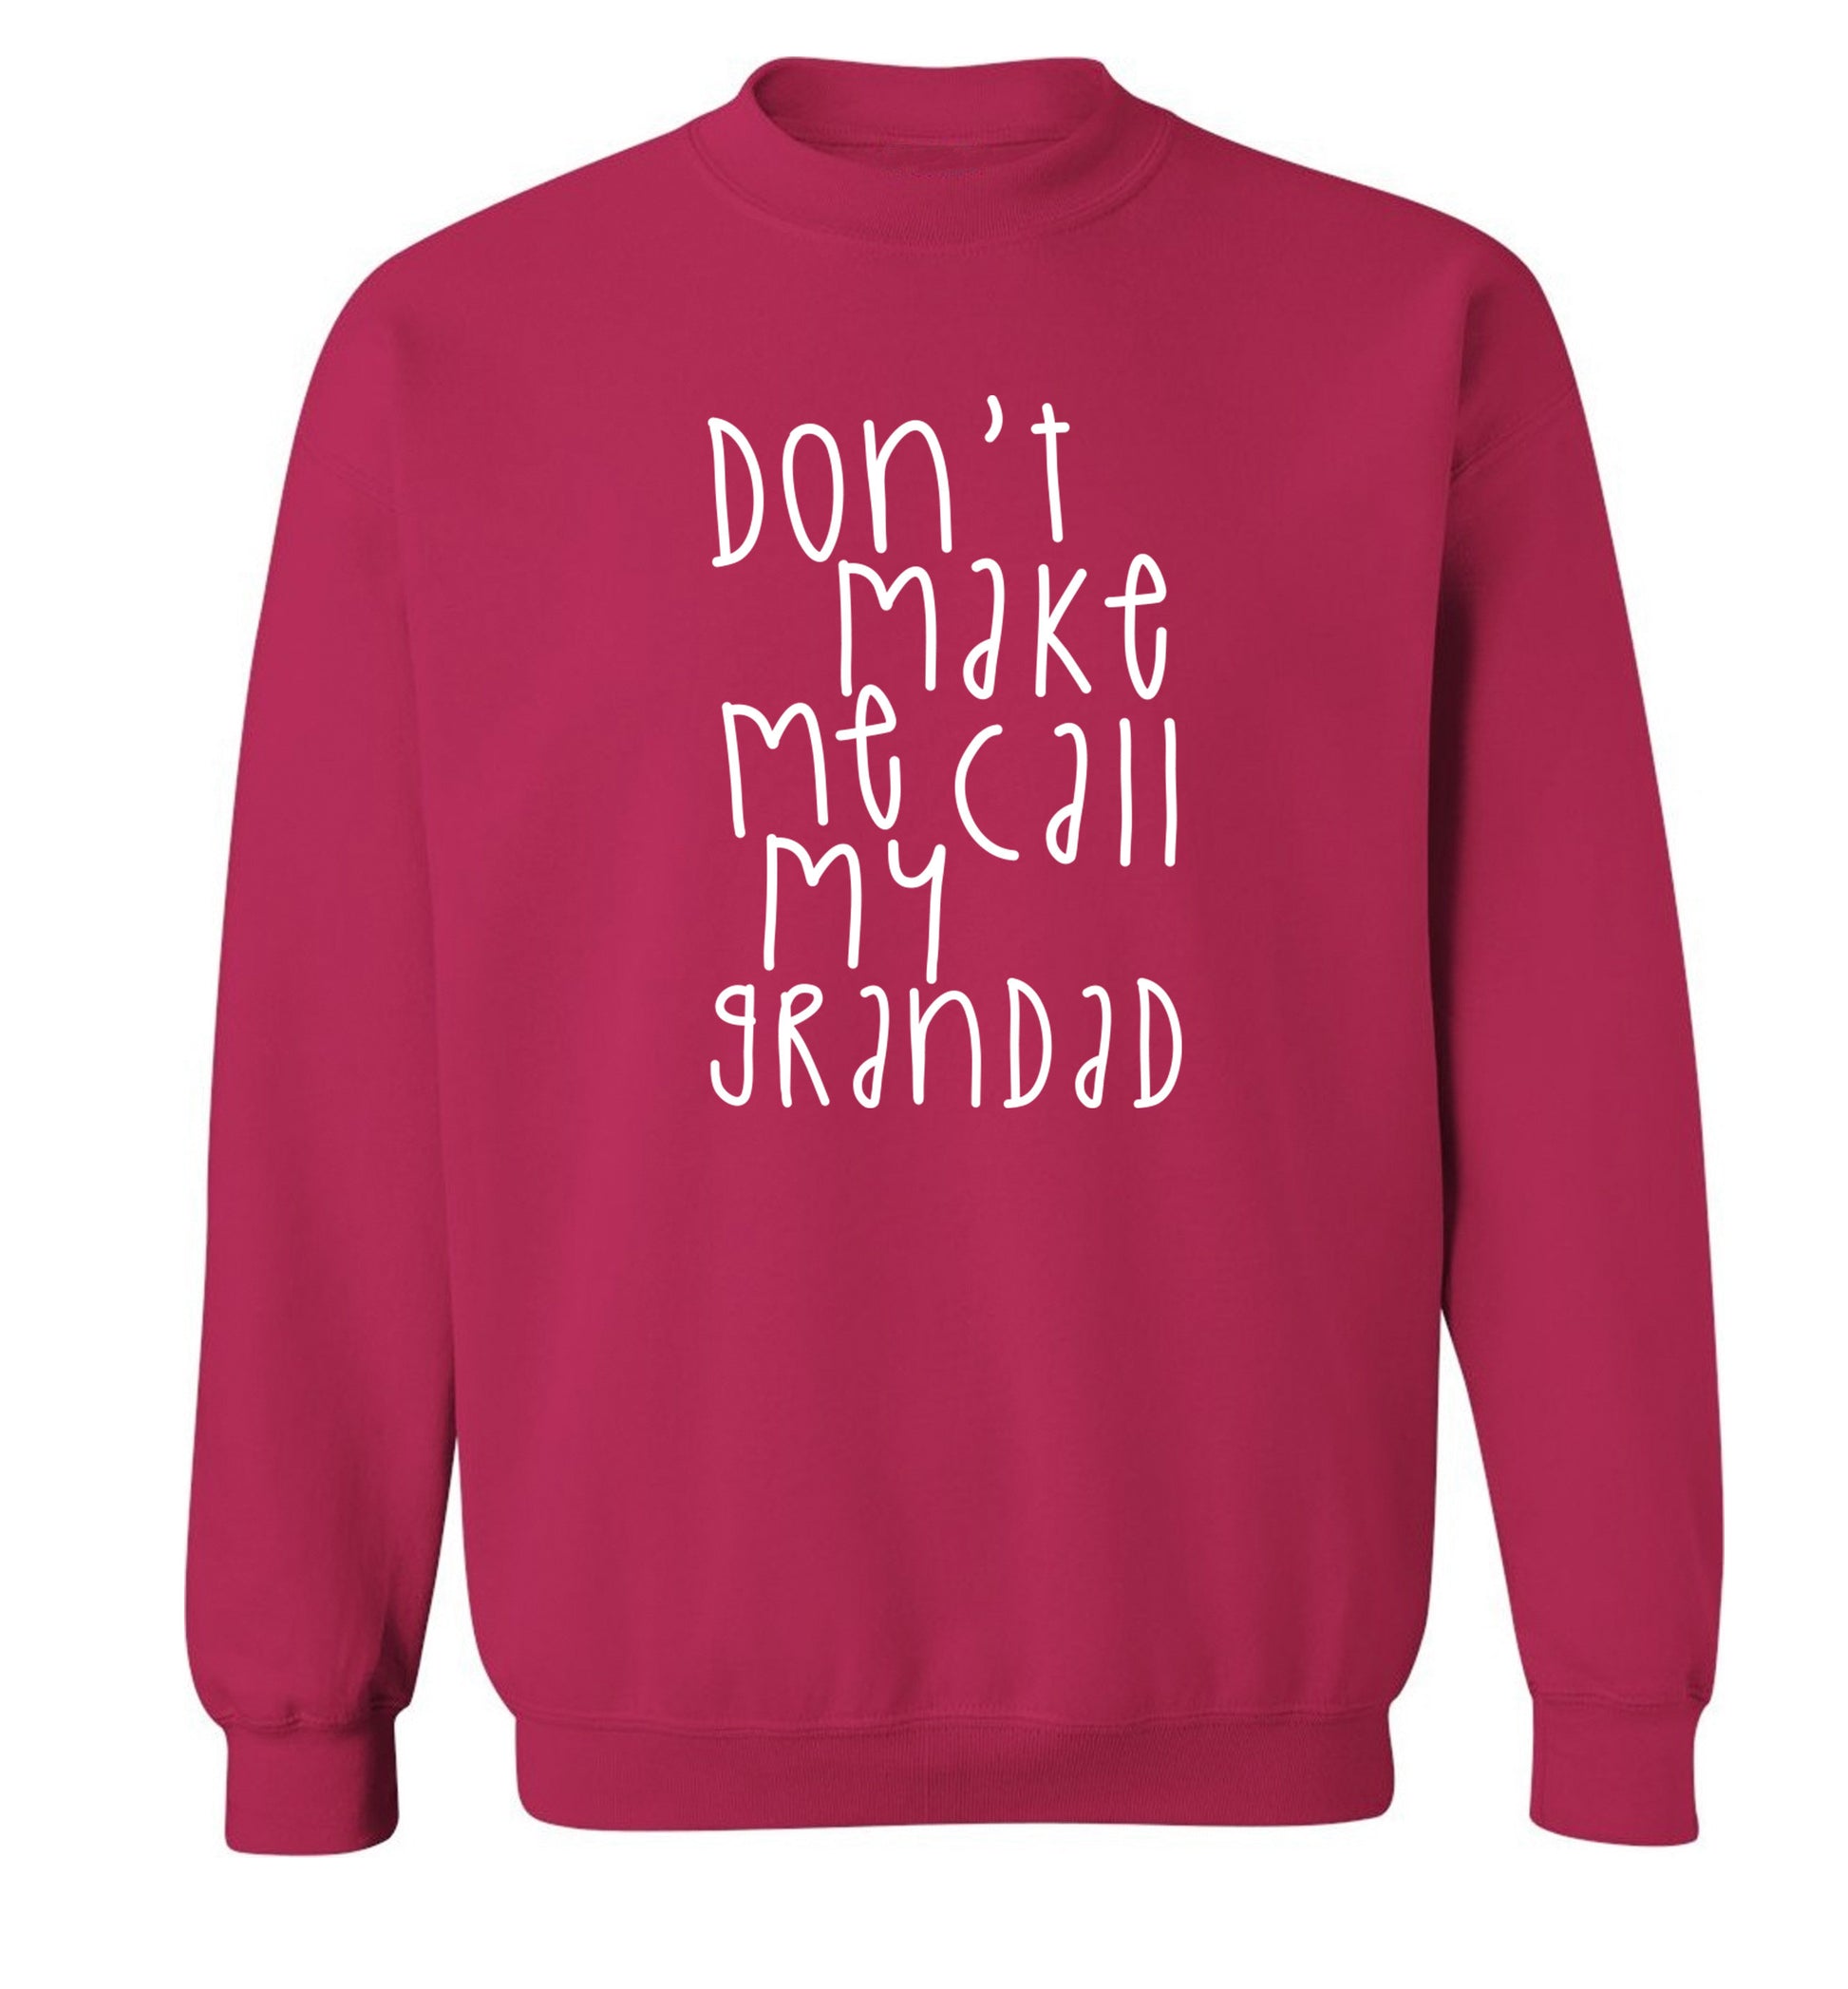 Don't make me call my grandad Adult's unisex pink Sweater 2XL